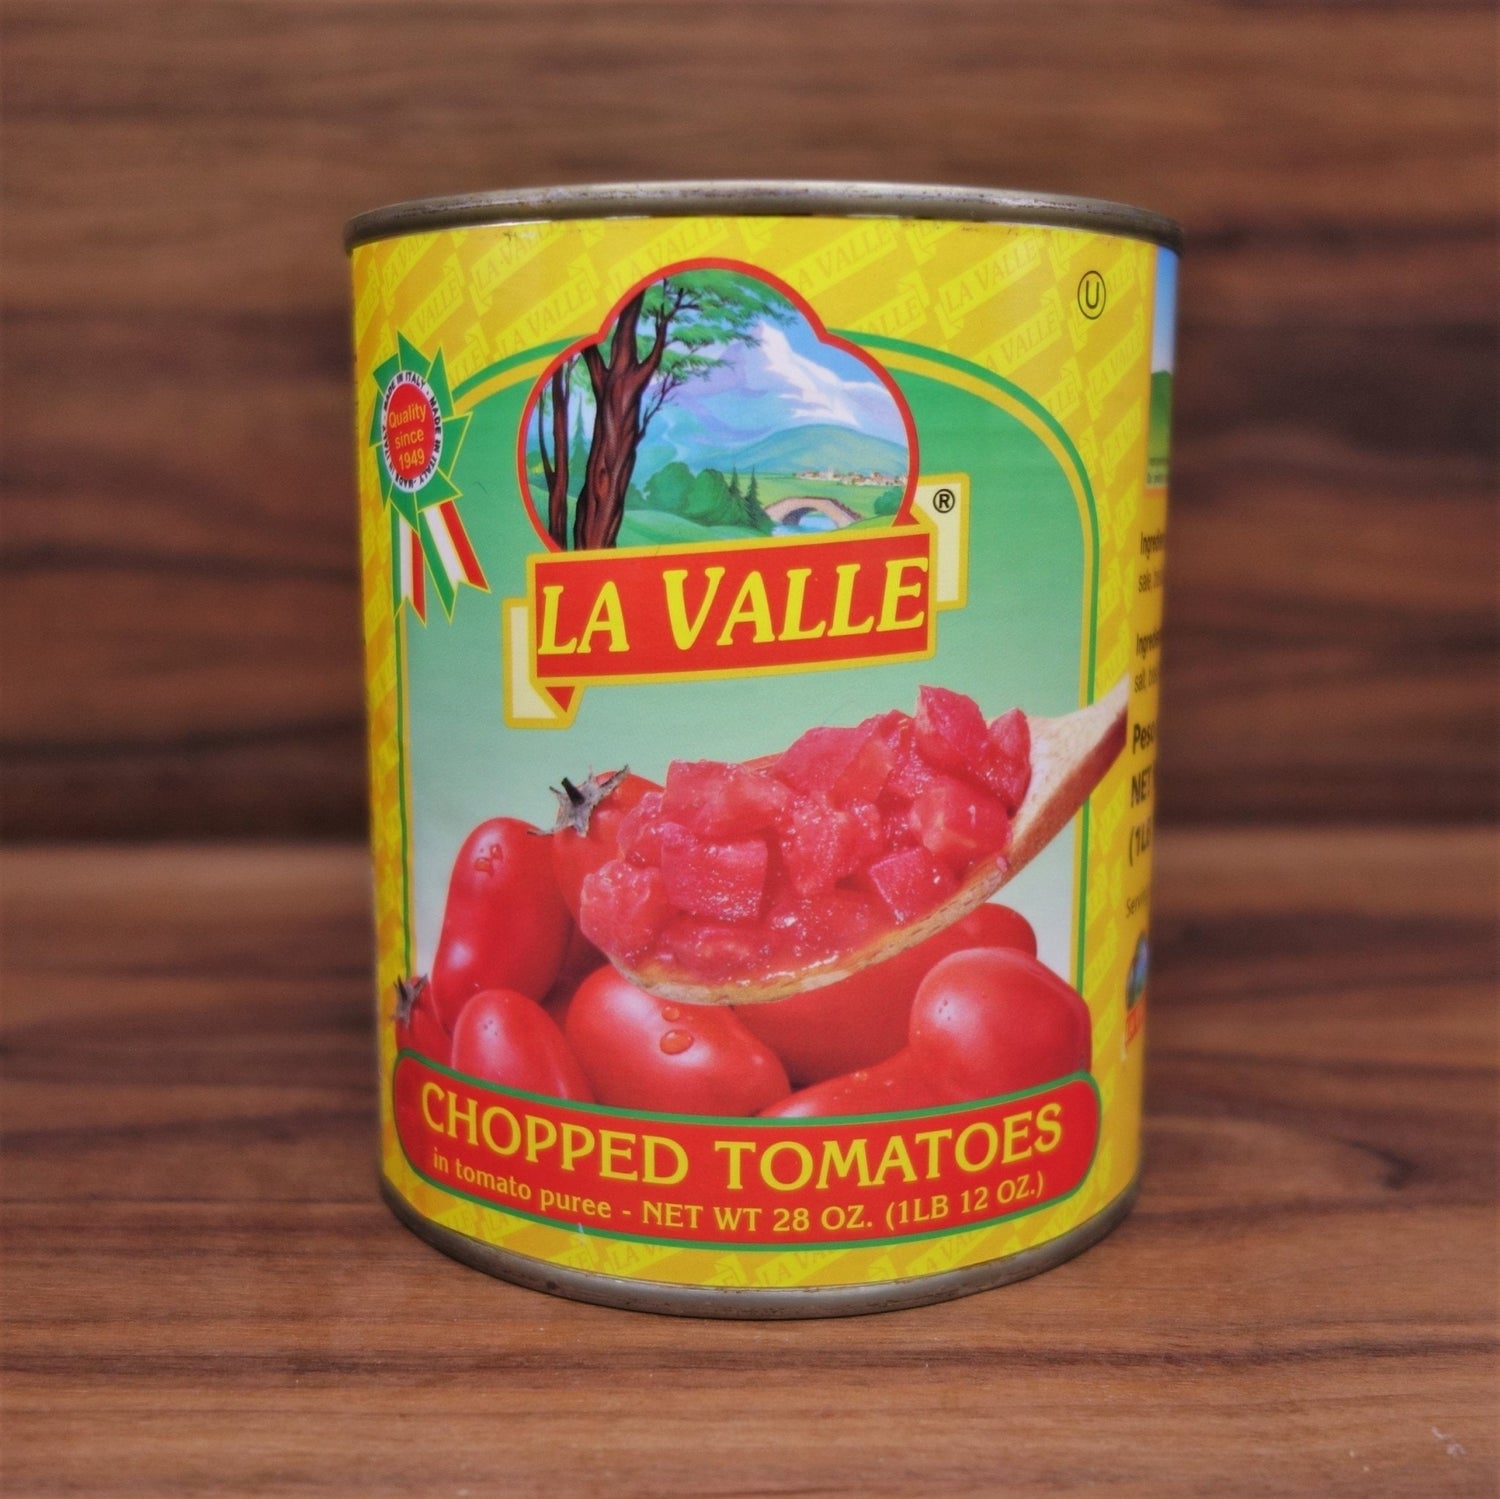 La Valle Chopped Tomatoes - Mongers' Provisions